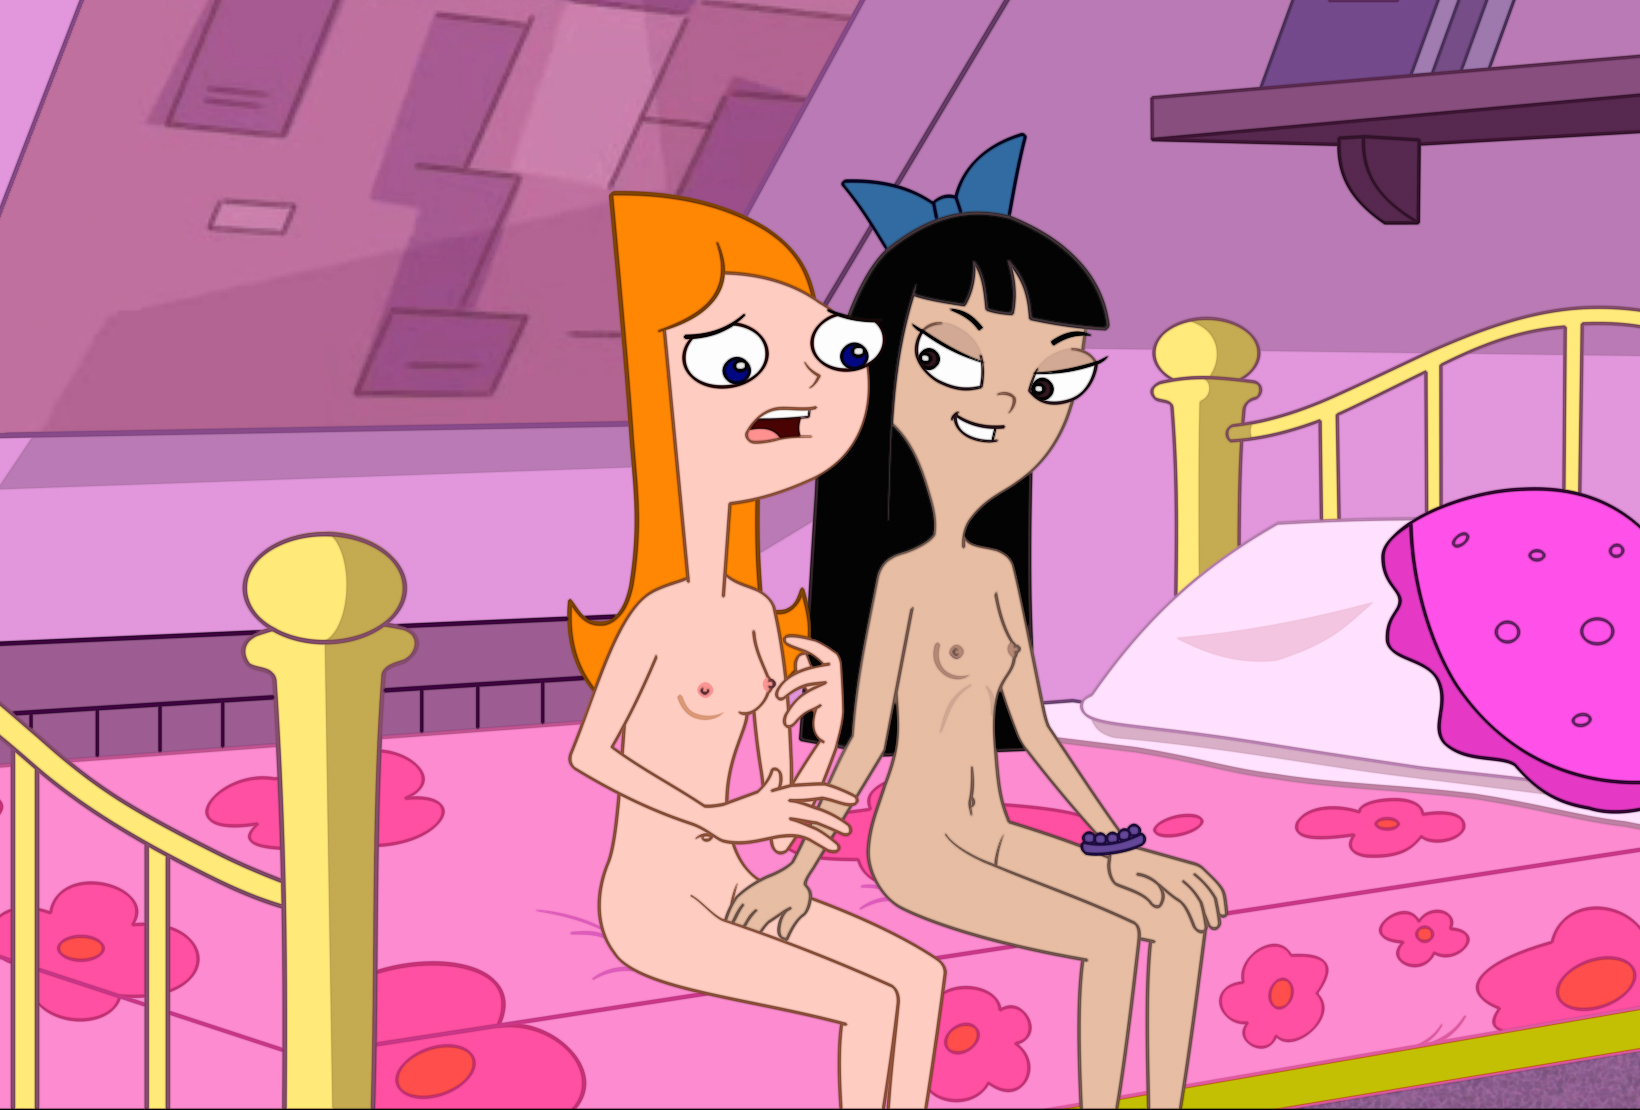 1133674 - Candace_Flynn Phineas_and_Ferb Stacy_Hirano.jpg.